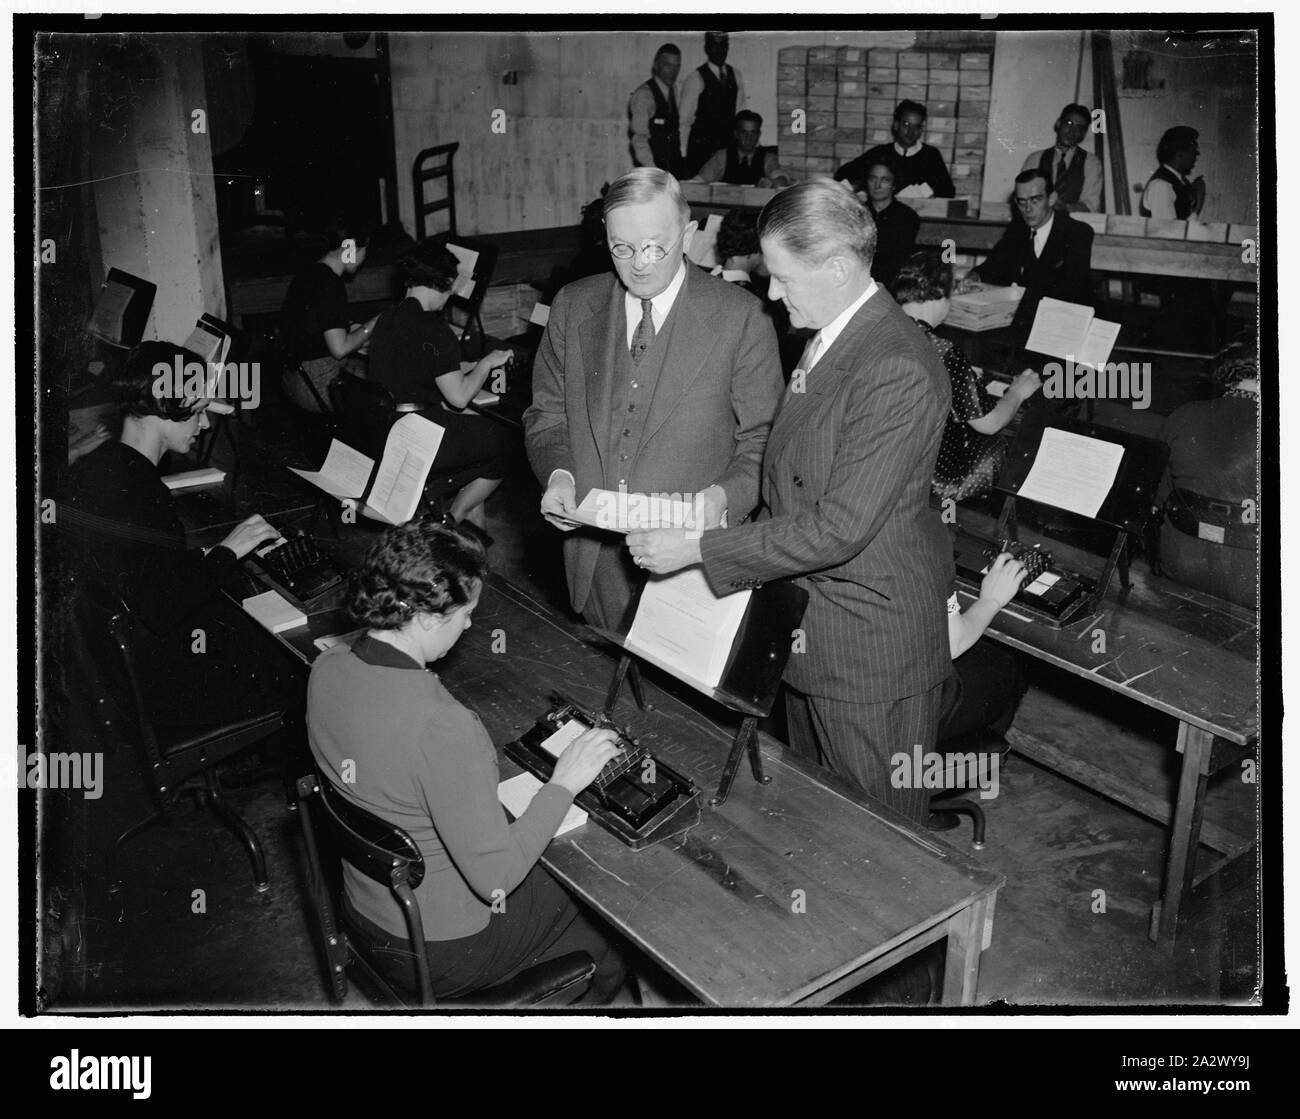 Responsible for unemployment census. Washington, D.C., Nov. 24. William L. Austin (left) Director of the U.S. Census Bureau and whose workers are tabulating the returns from the unemployment questionnaires, describes to Unemployment Census Director John D. Biggers the working of the special tabulating machine used to count the unemployed noses. Work of counting the unemployed returns was begun in the Capital today. 11/24/37 Stock Photo